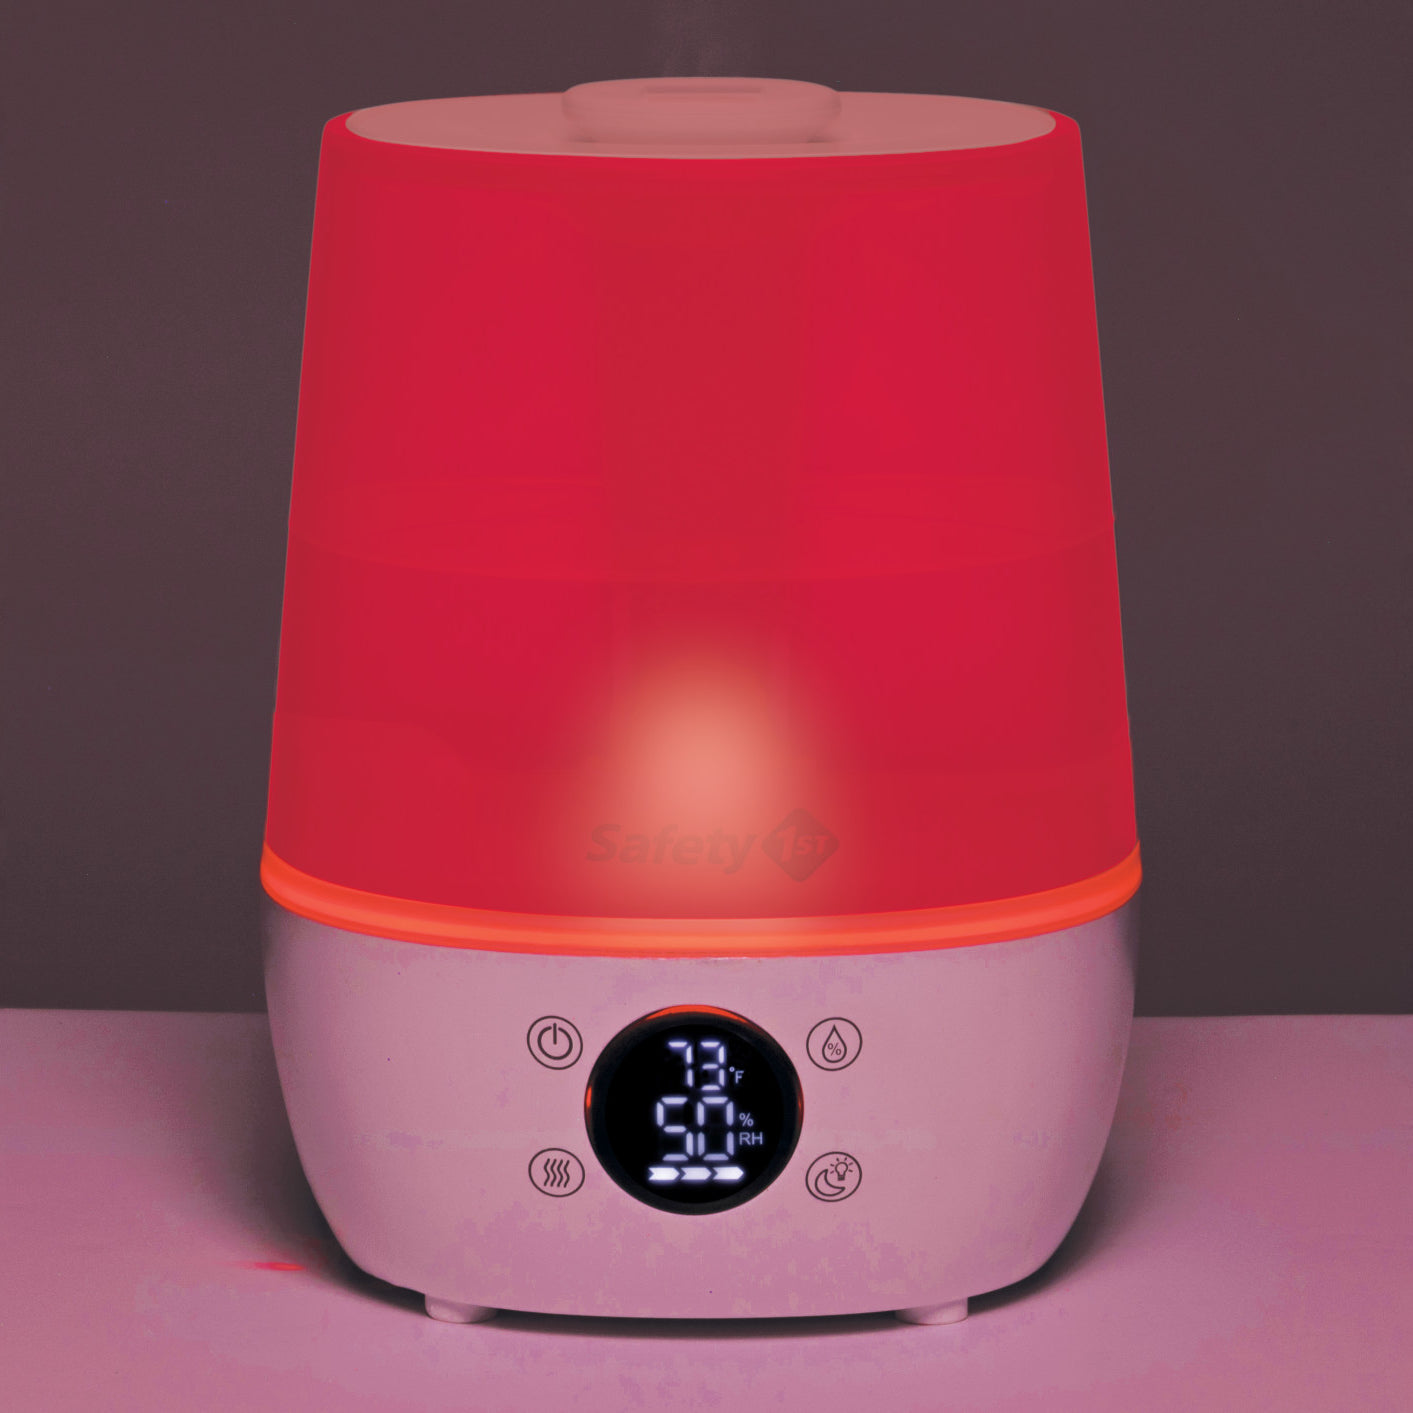 Humid Control Filter Free Humidifier - red nightlight